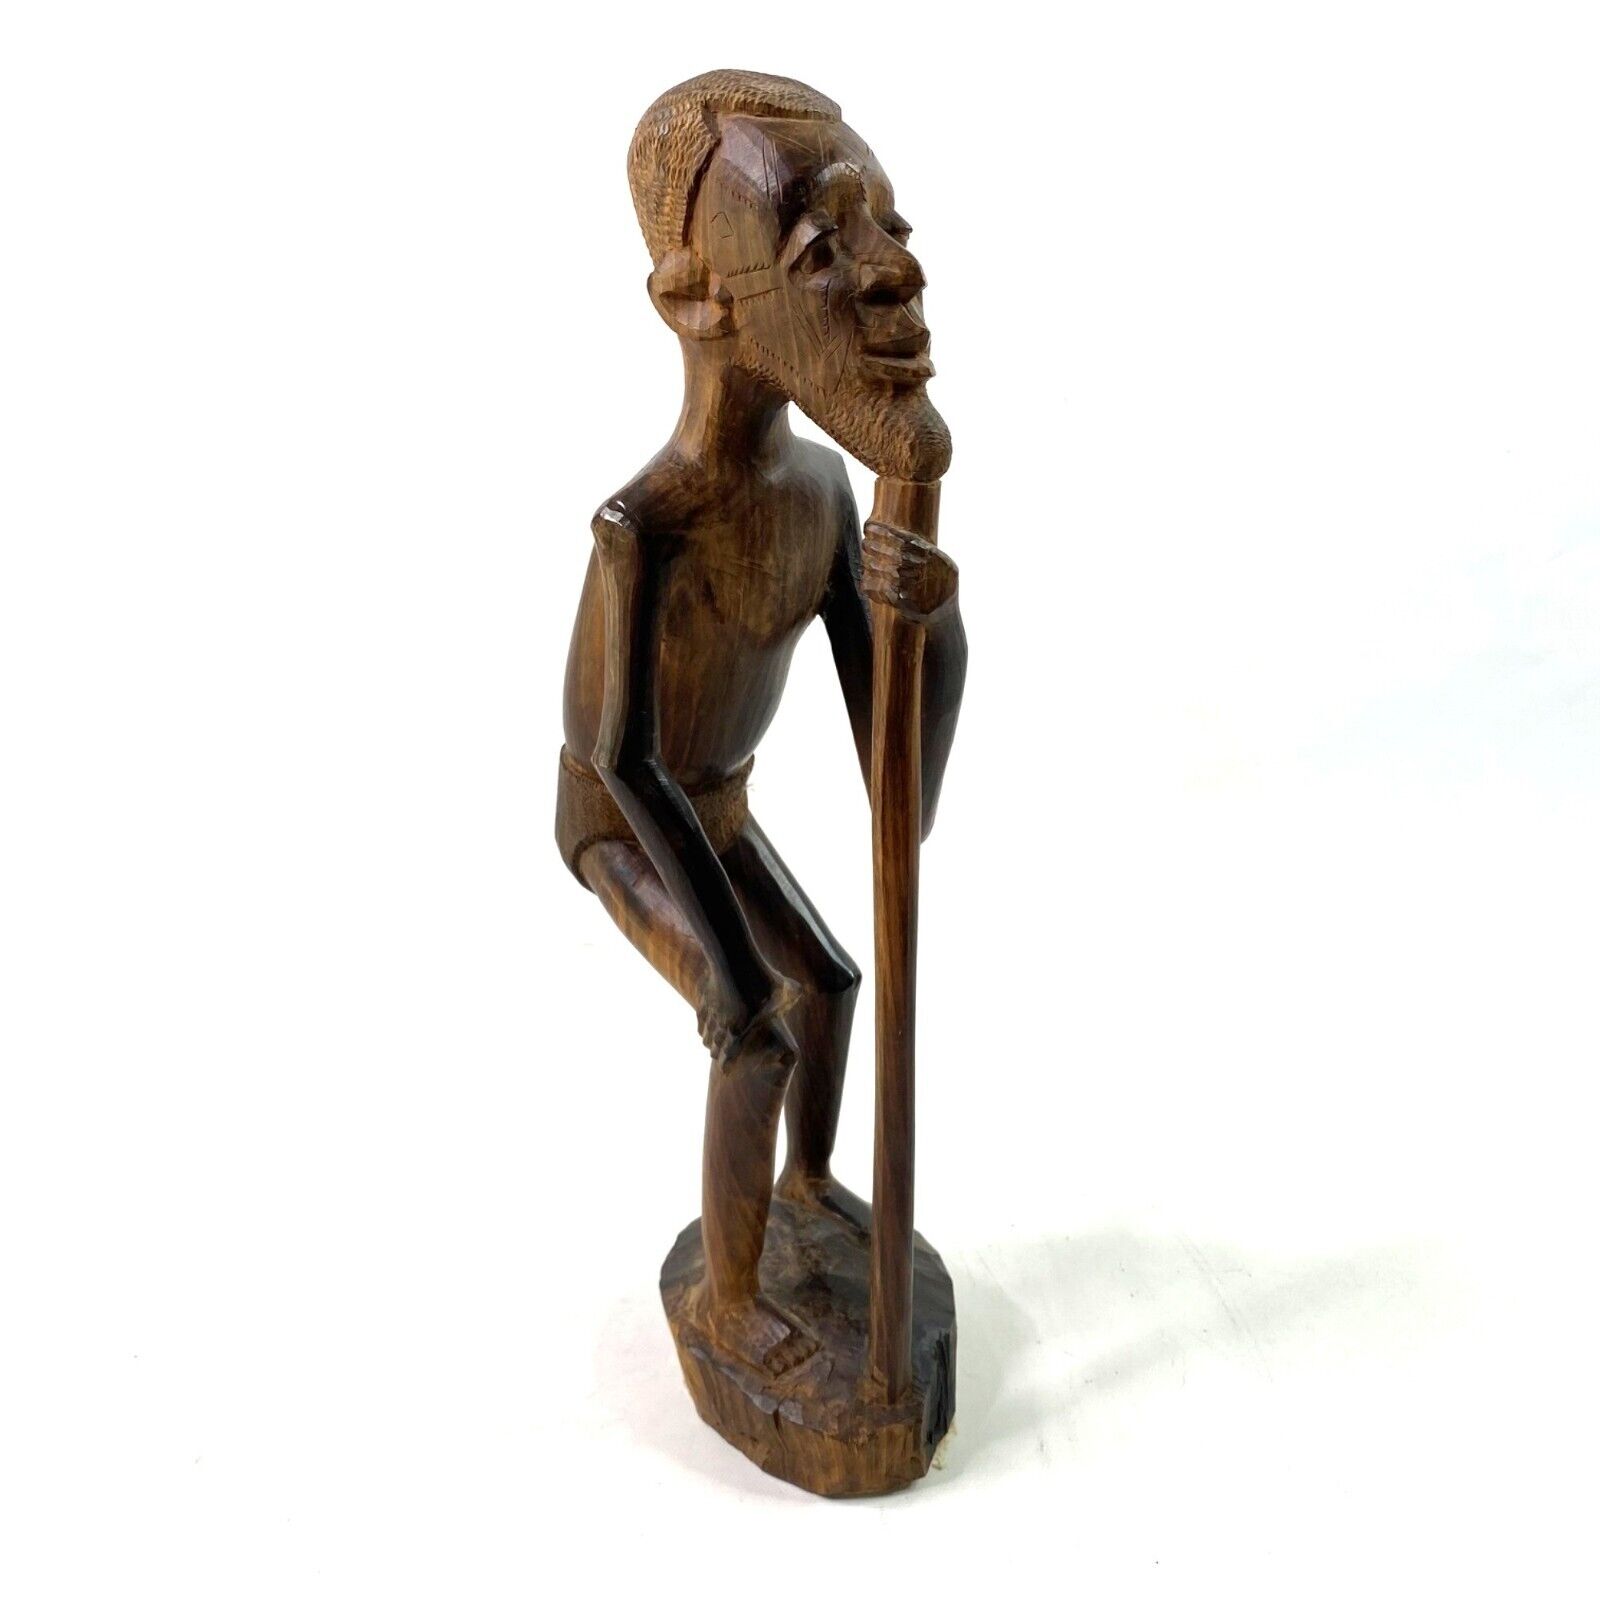 African Man Wood Carving Sculpture Old Man with Walking Stick Primitive Rustic